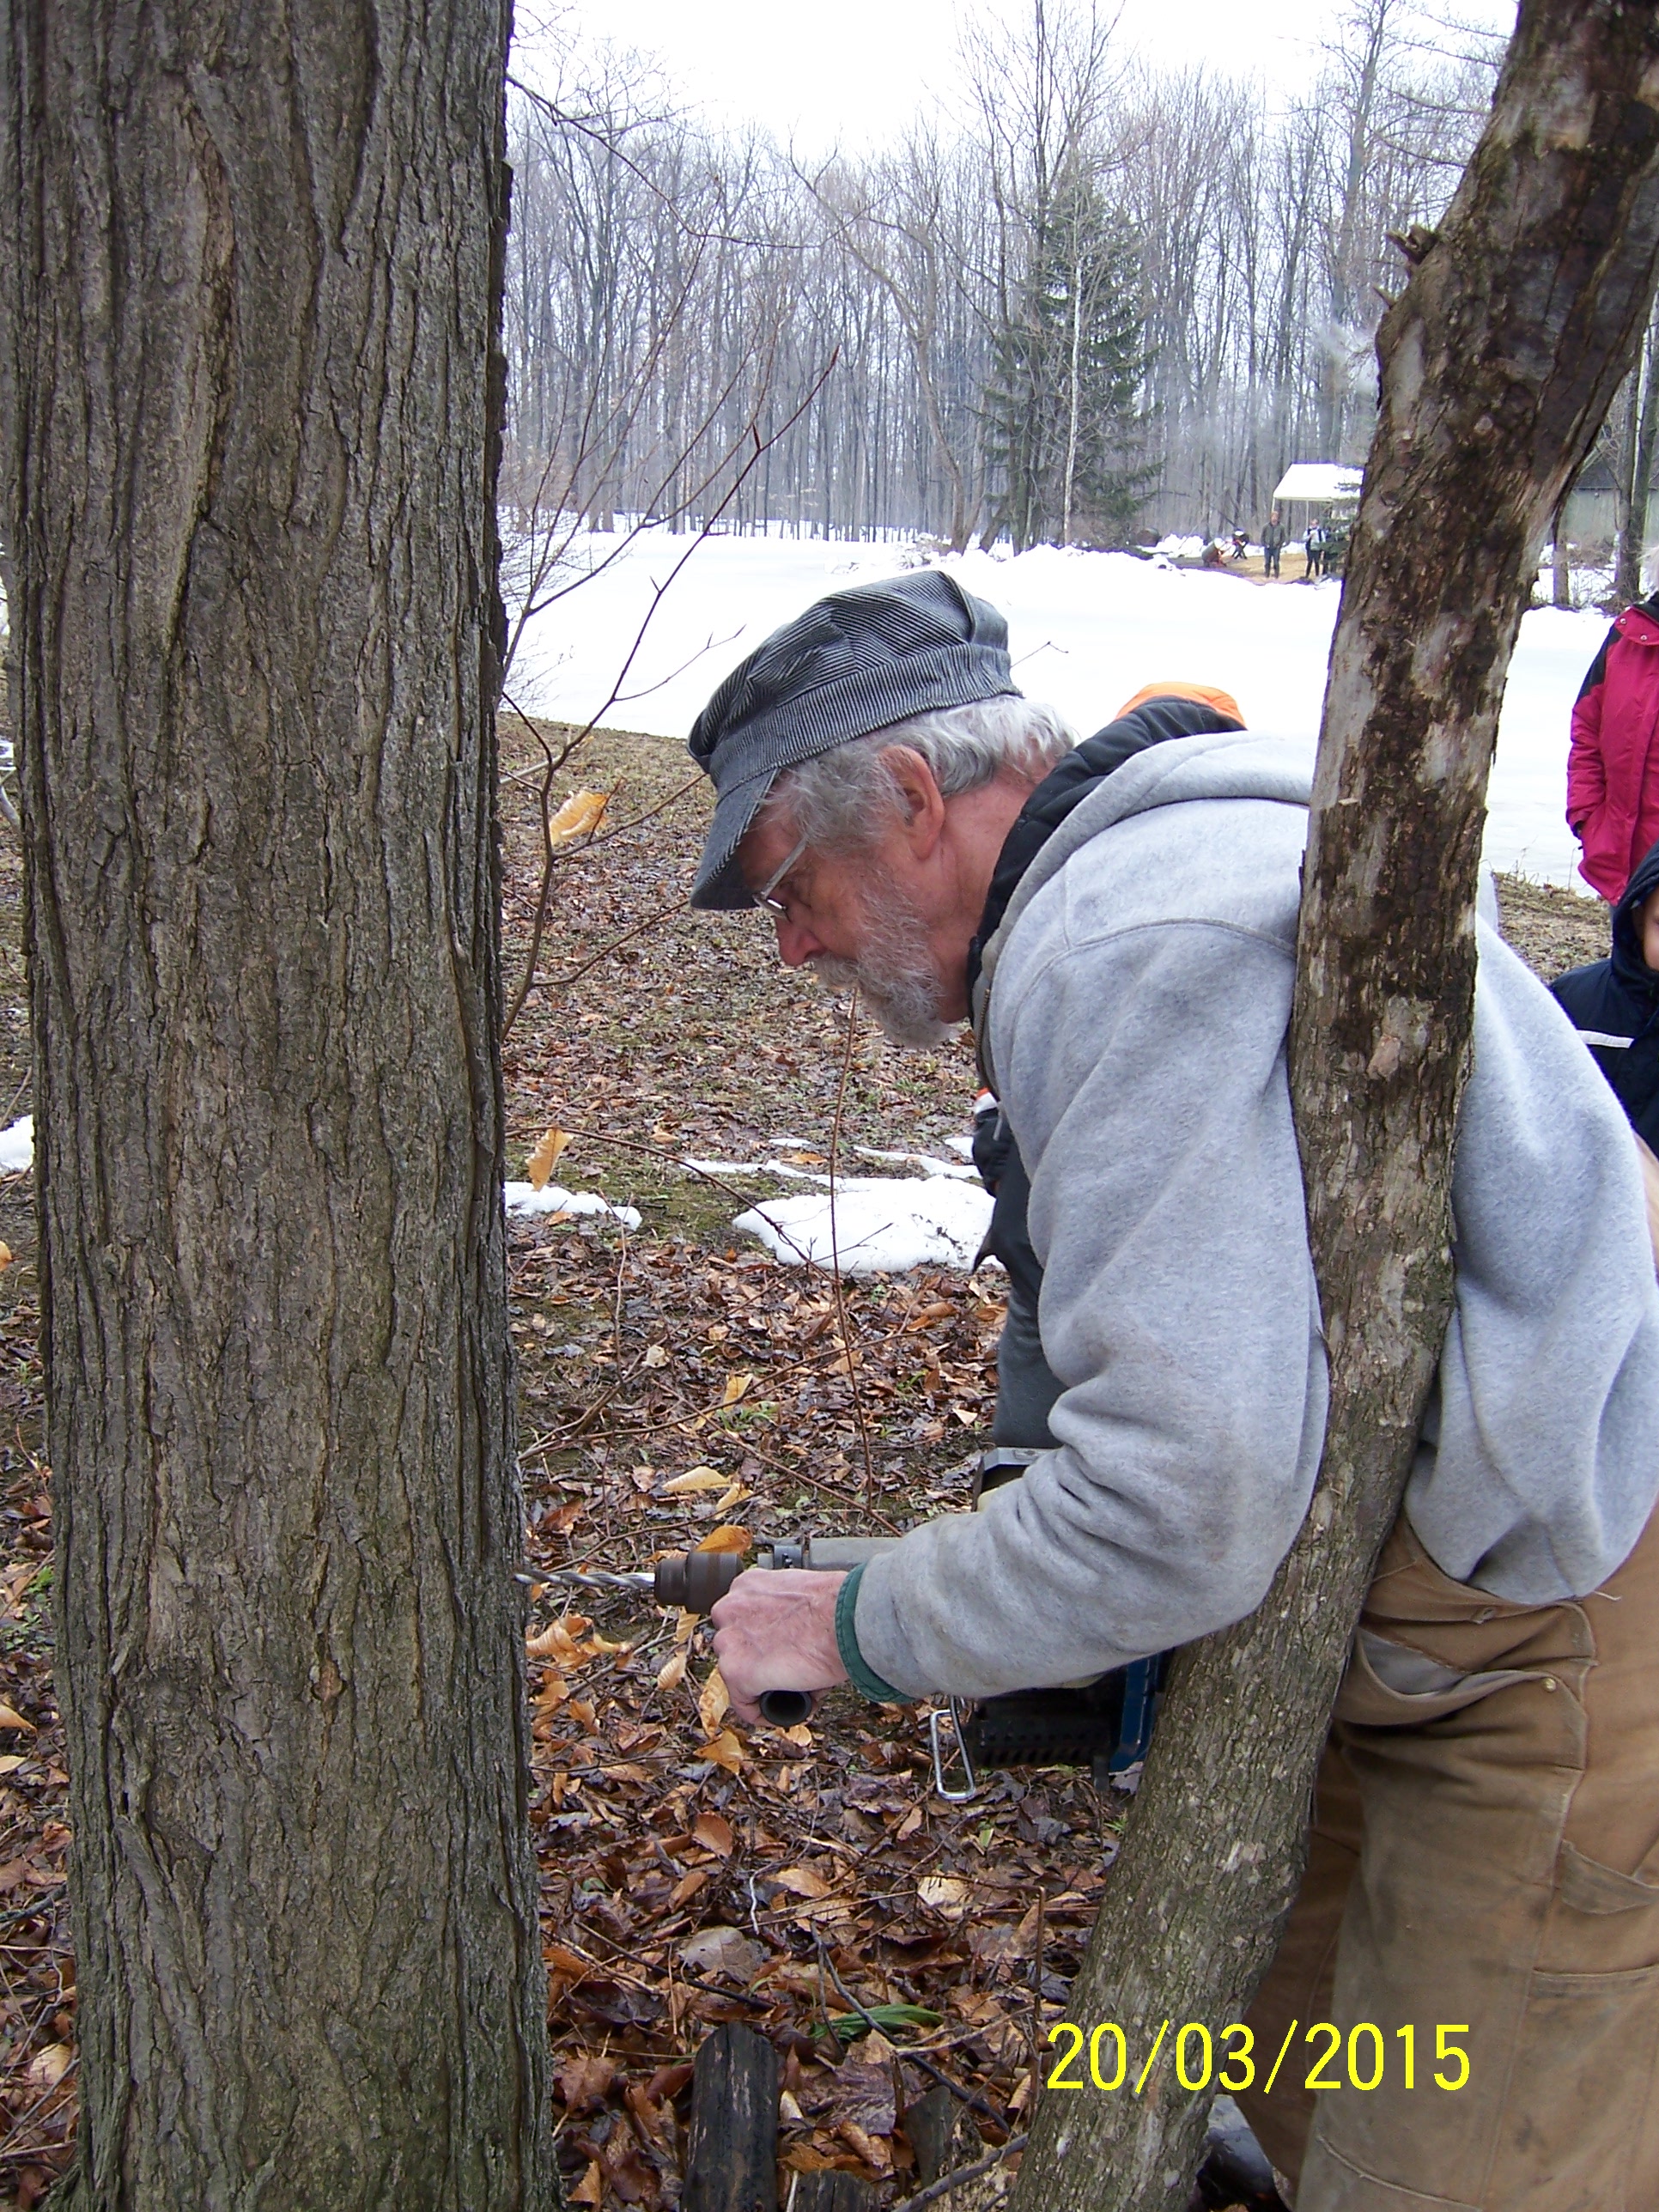 Maple Weekend 2016: The sweet tradition continues